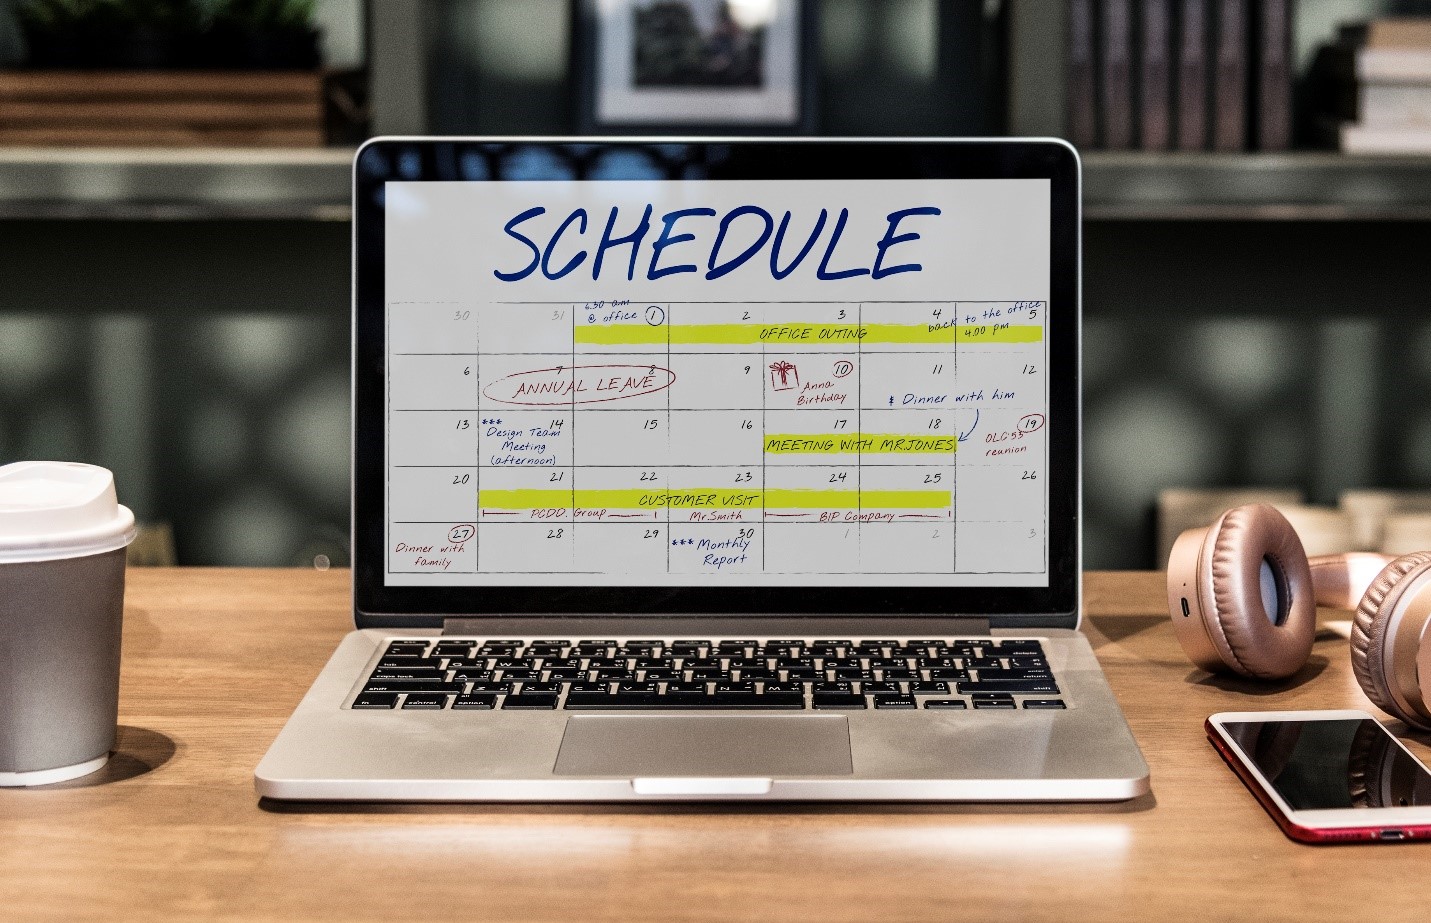 Have a schedule and spend time each week to bookkeeping